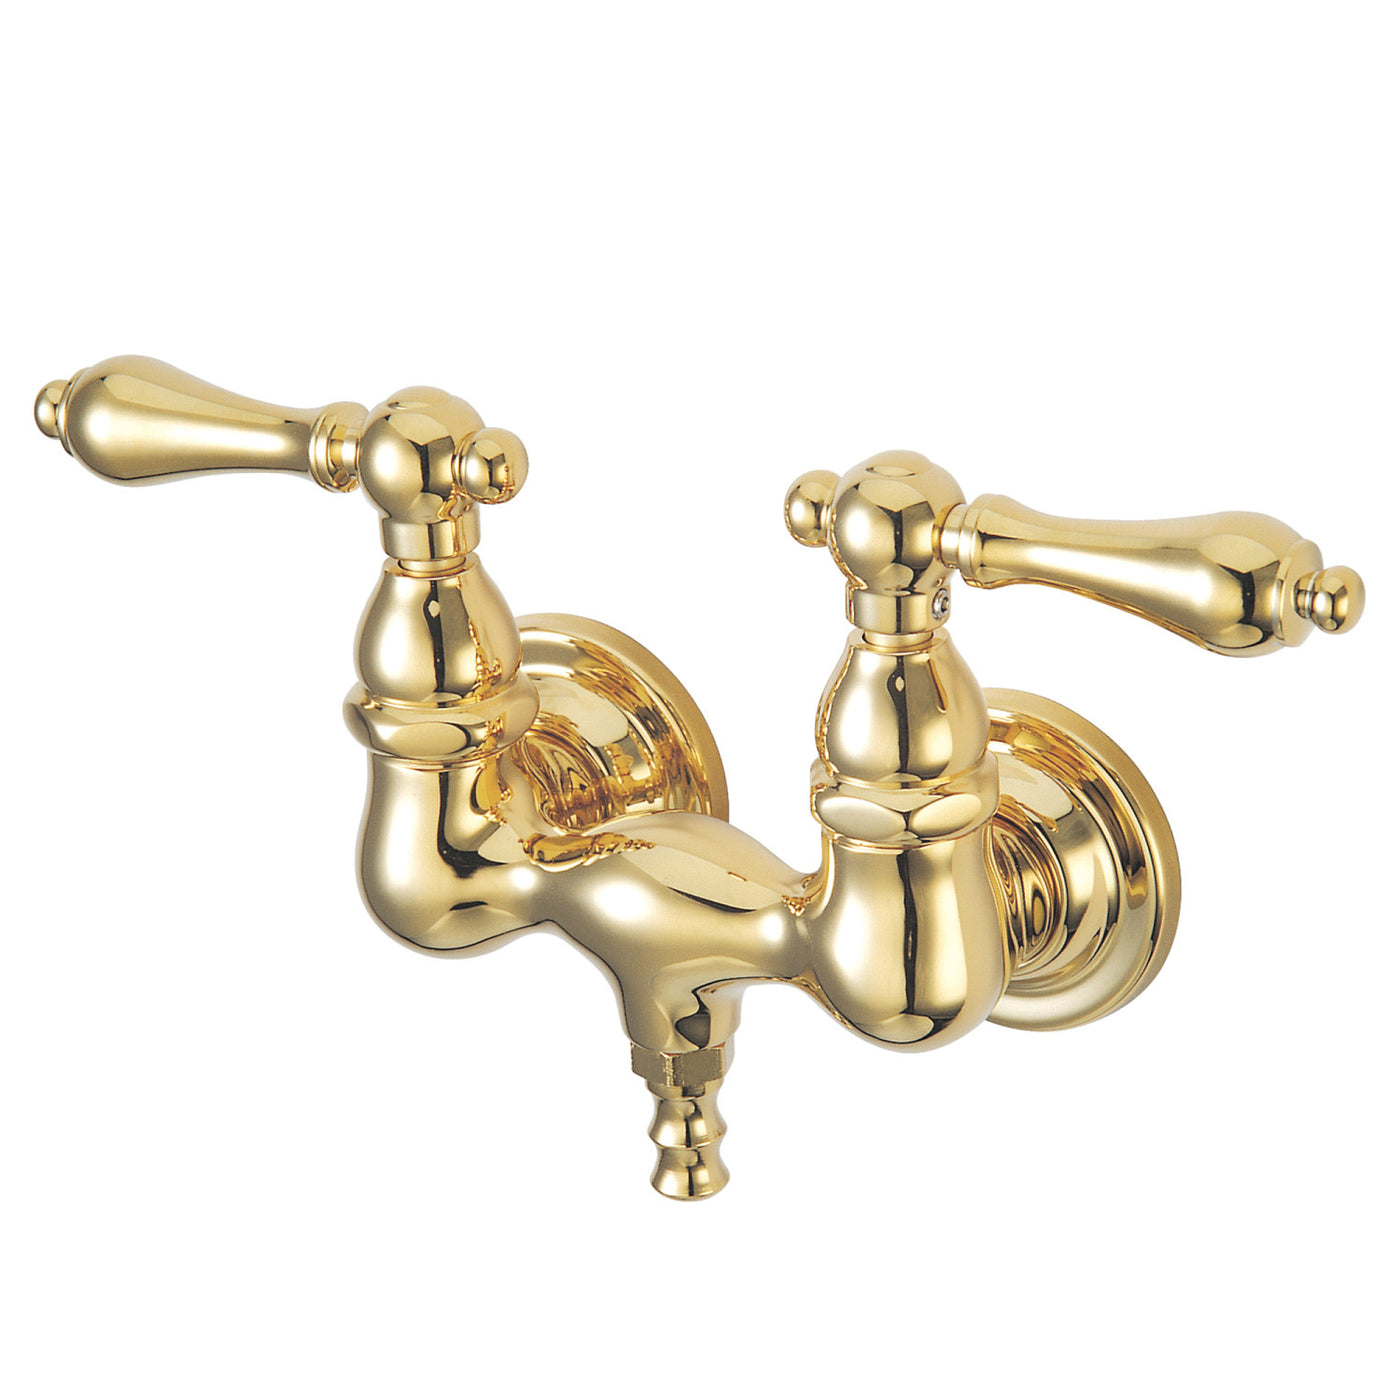 Elements of Design DT0312AL 3-3/8-Inch Wall Mount Tub Faucet, Polished Brass